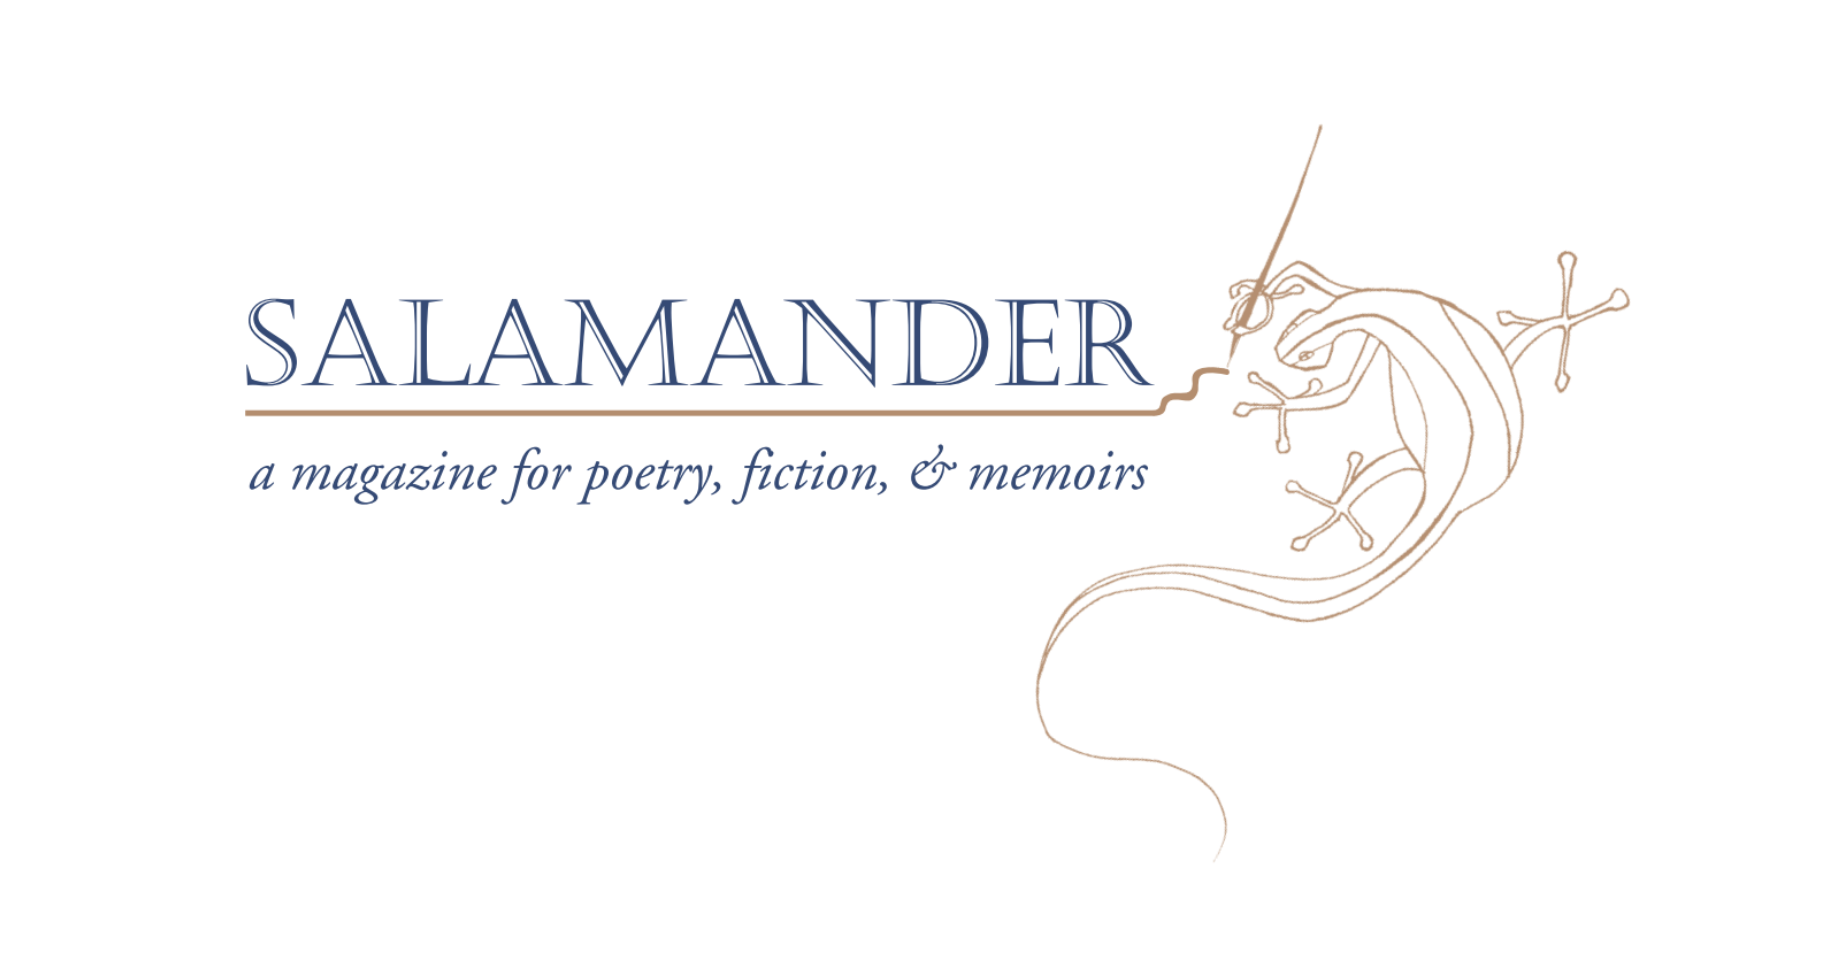 A logo showing a salamander holding a long pen and the words "salamander a magazine for poetry, fiction & memoirs"